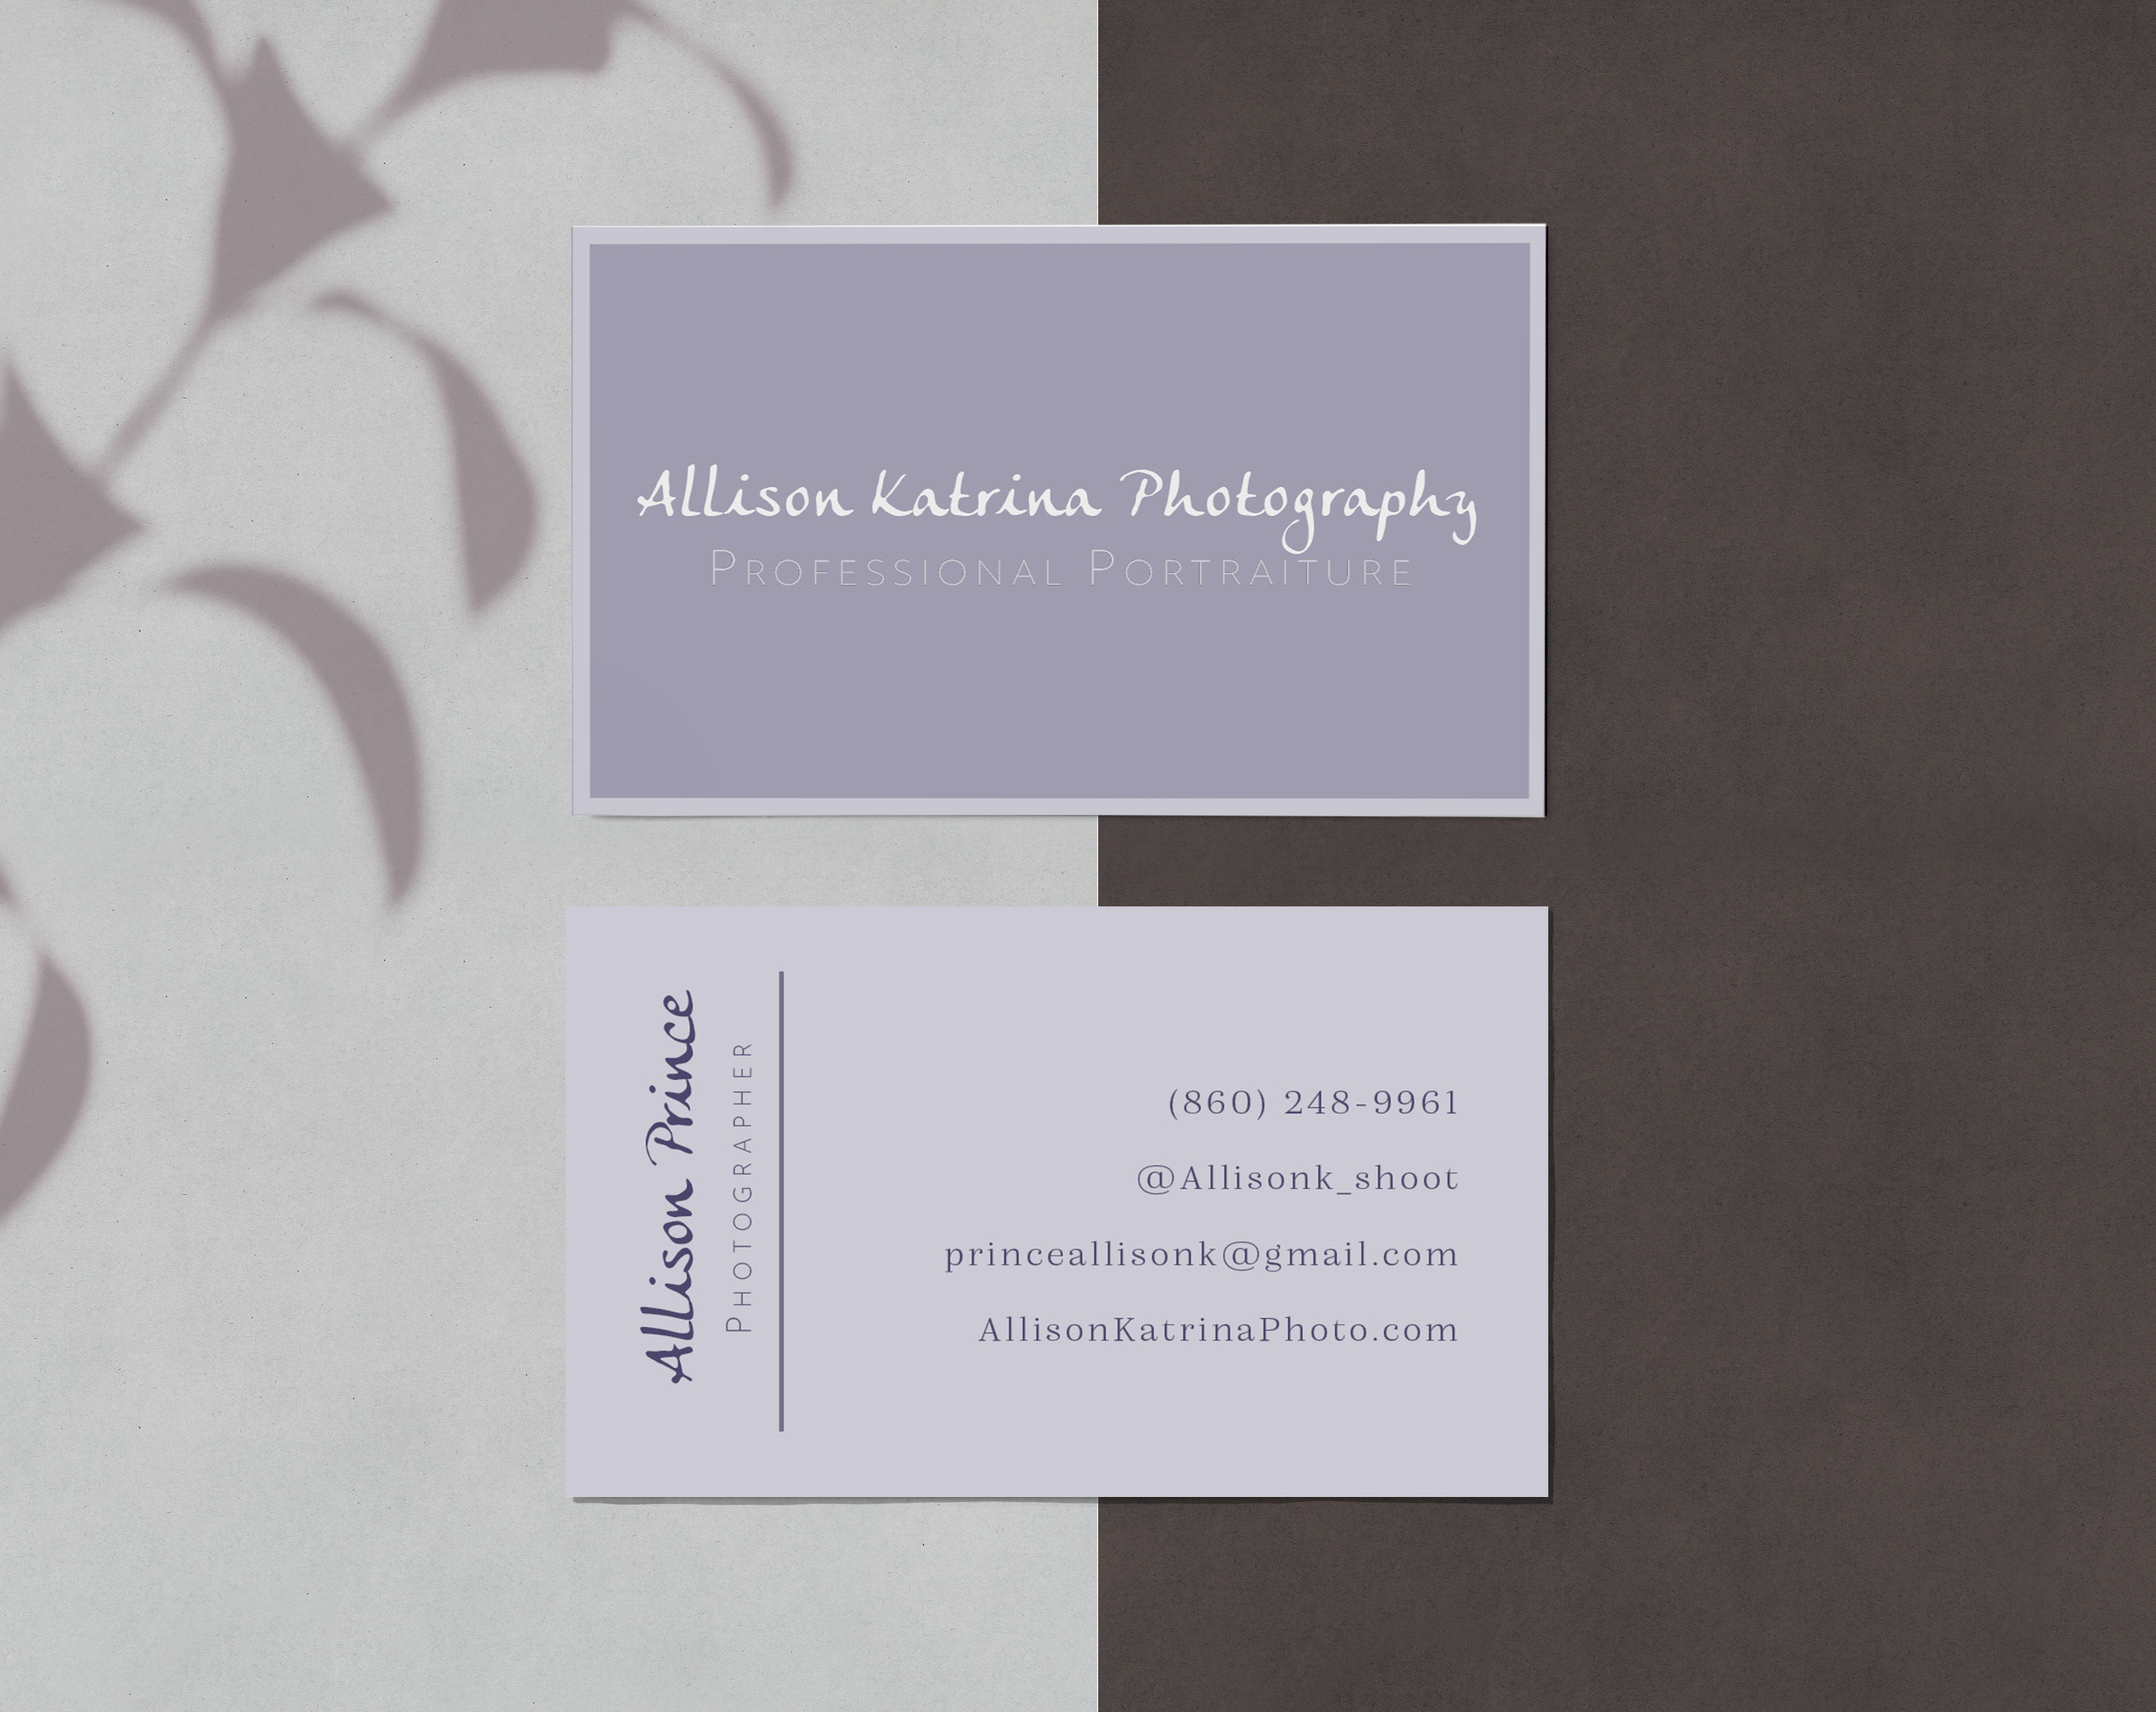 Business cards created for client who is a photographer. 

Mockup image credit: rawpixel.com - www.freepik.com